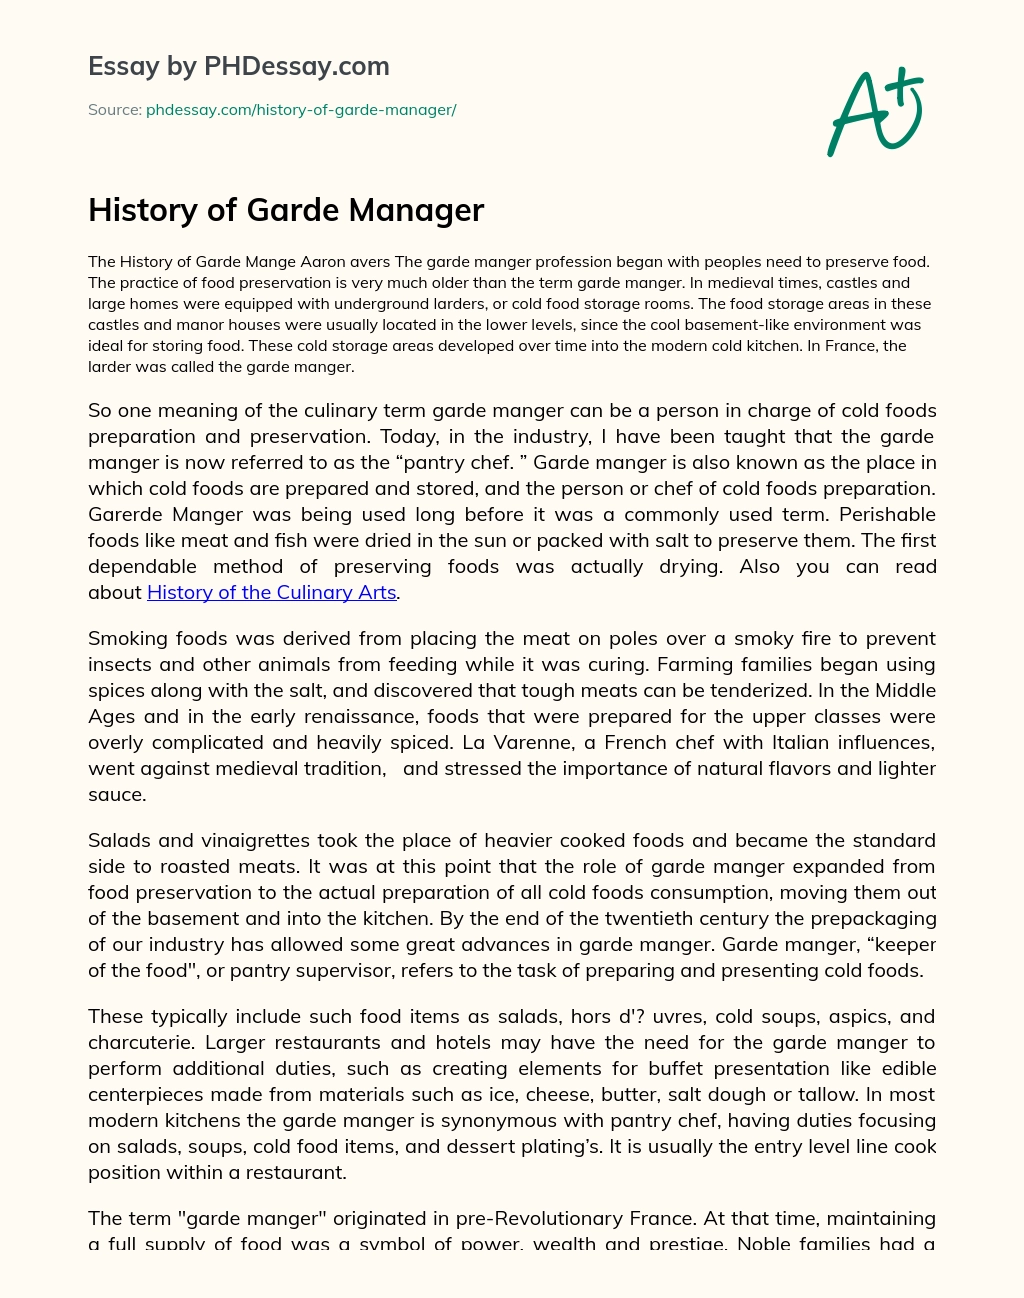 History of Garde Manager essay